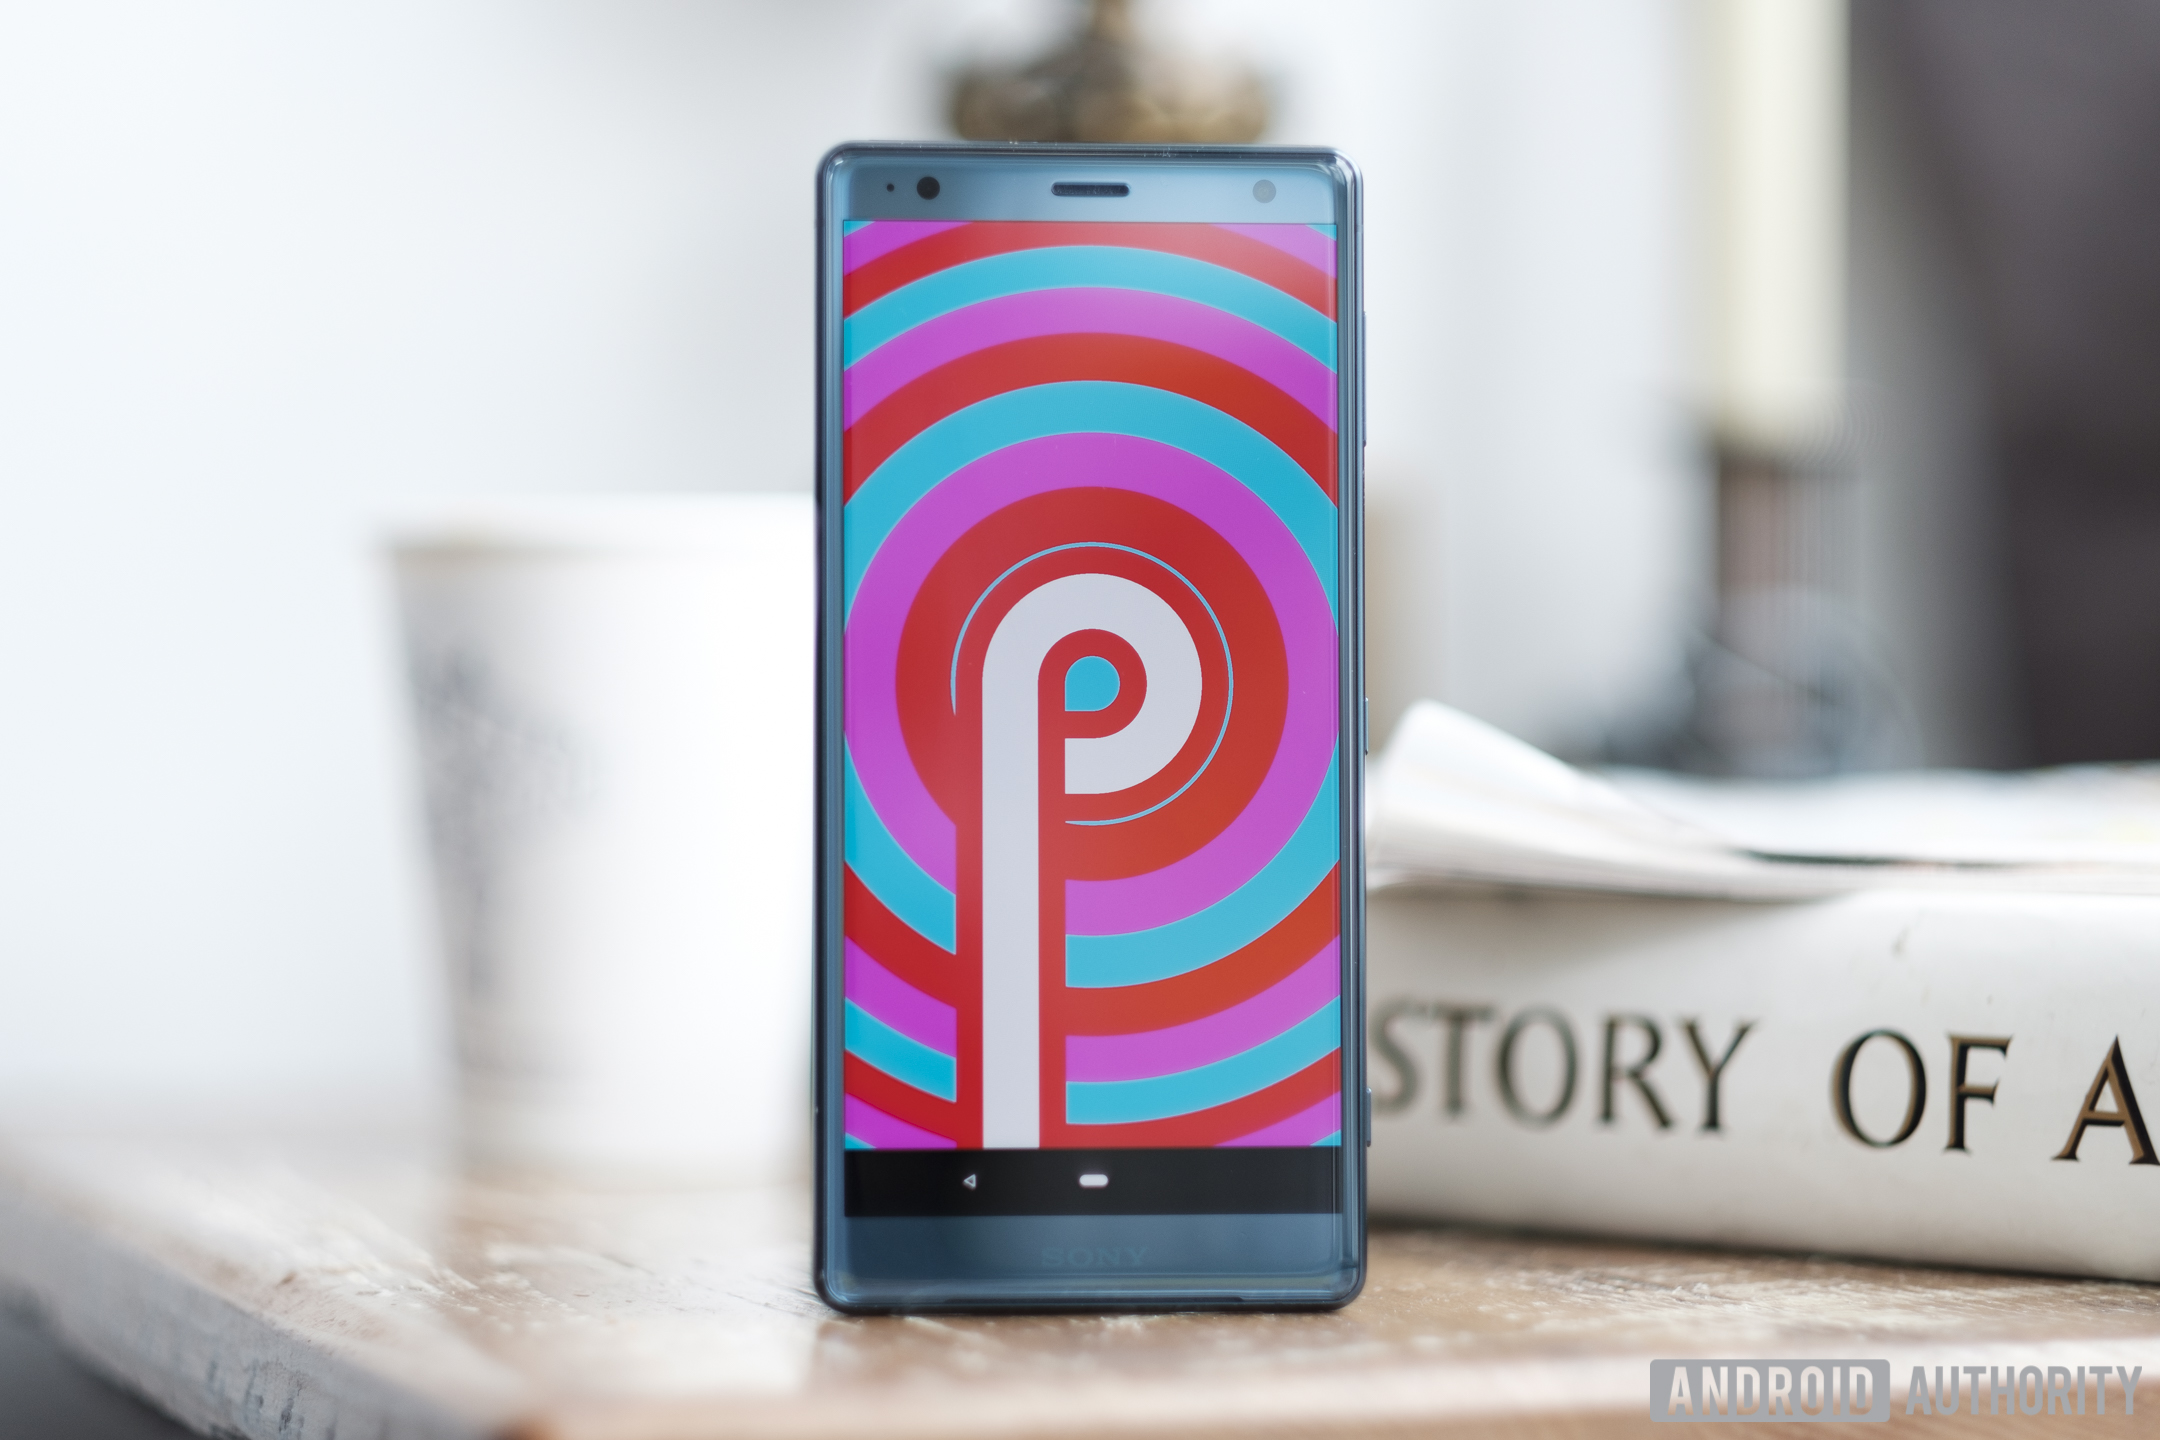 Photo of the fron side of Sony Xperia XZ2 displaying the Android Pie logo - Sony review 2019